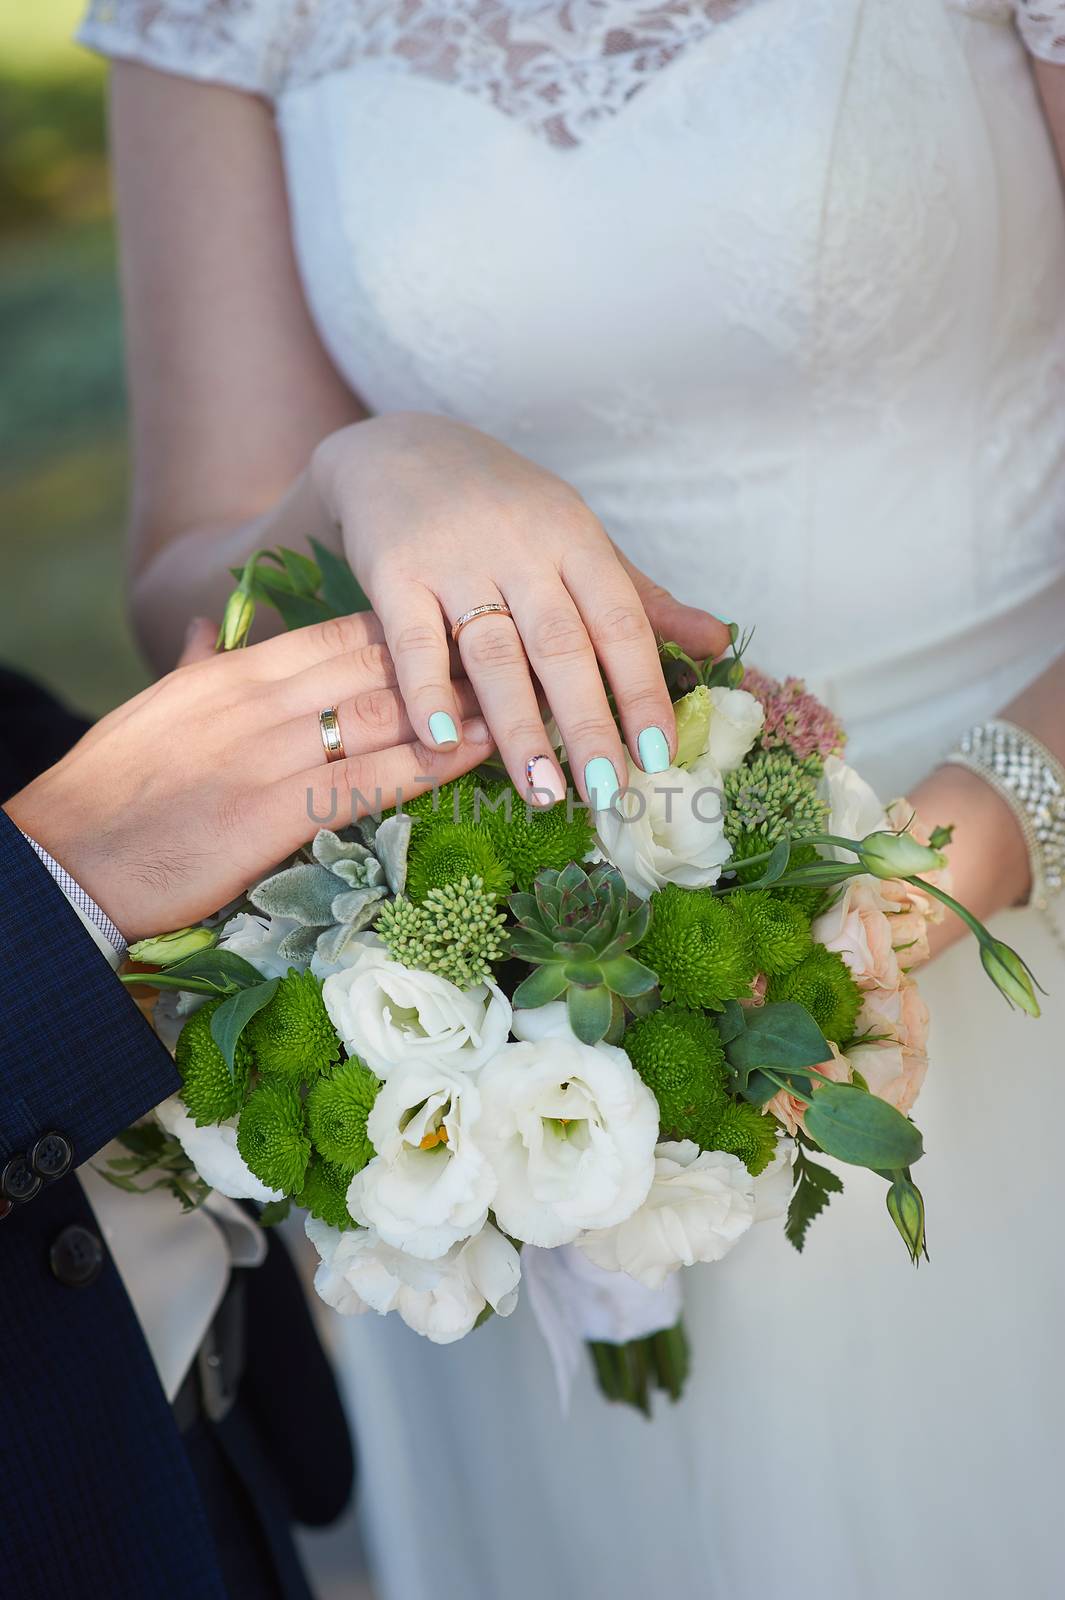 hands of the bride and groom with rings for wedding bouquet by timonko